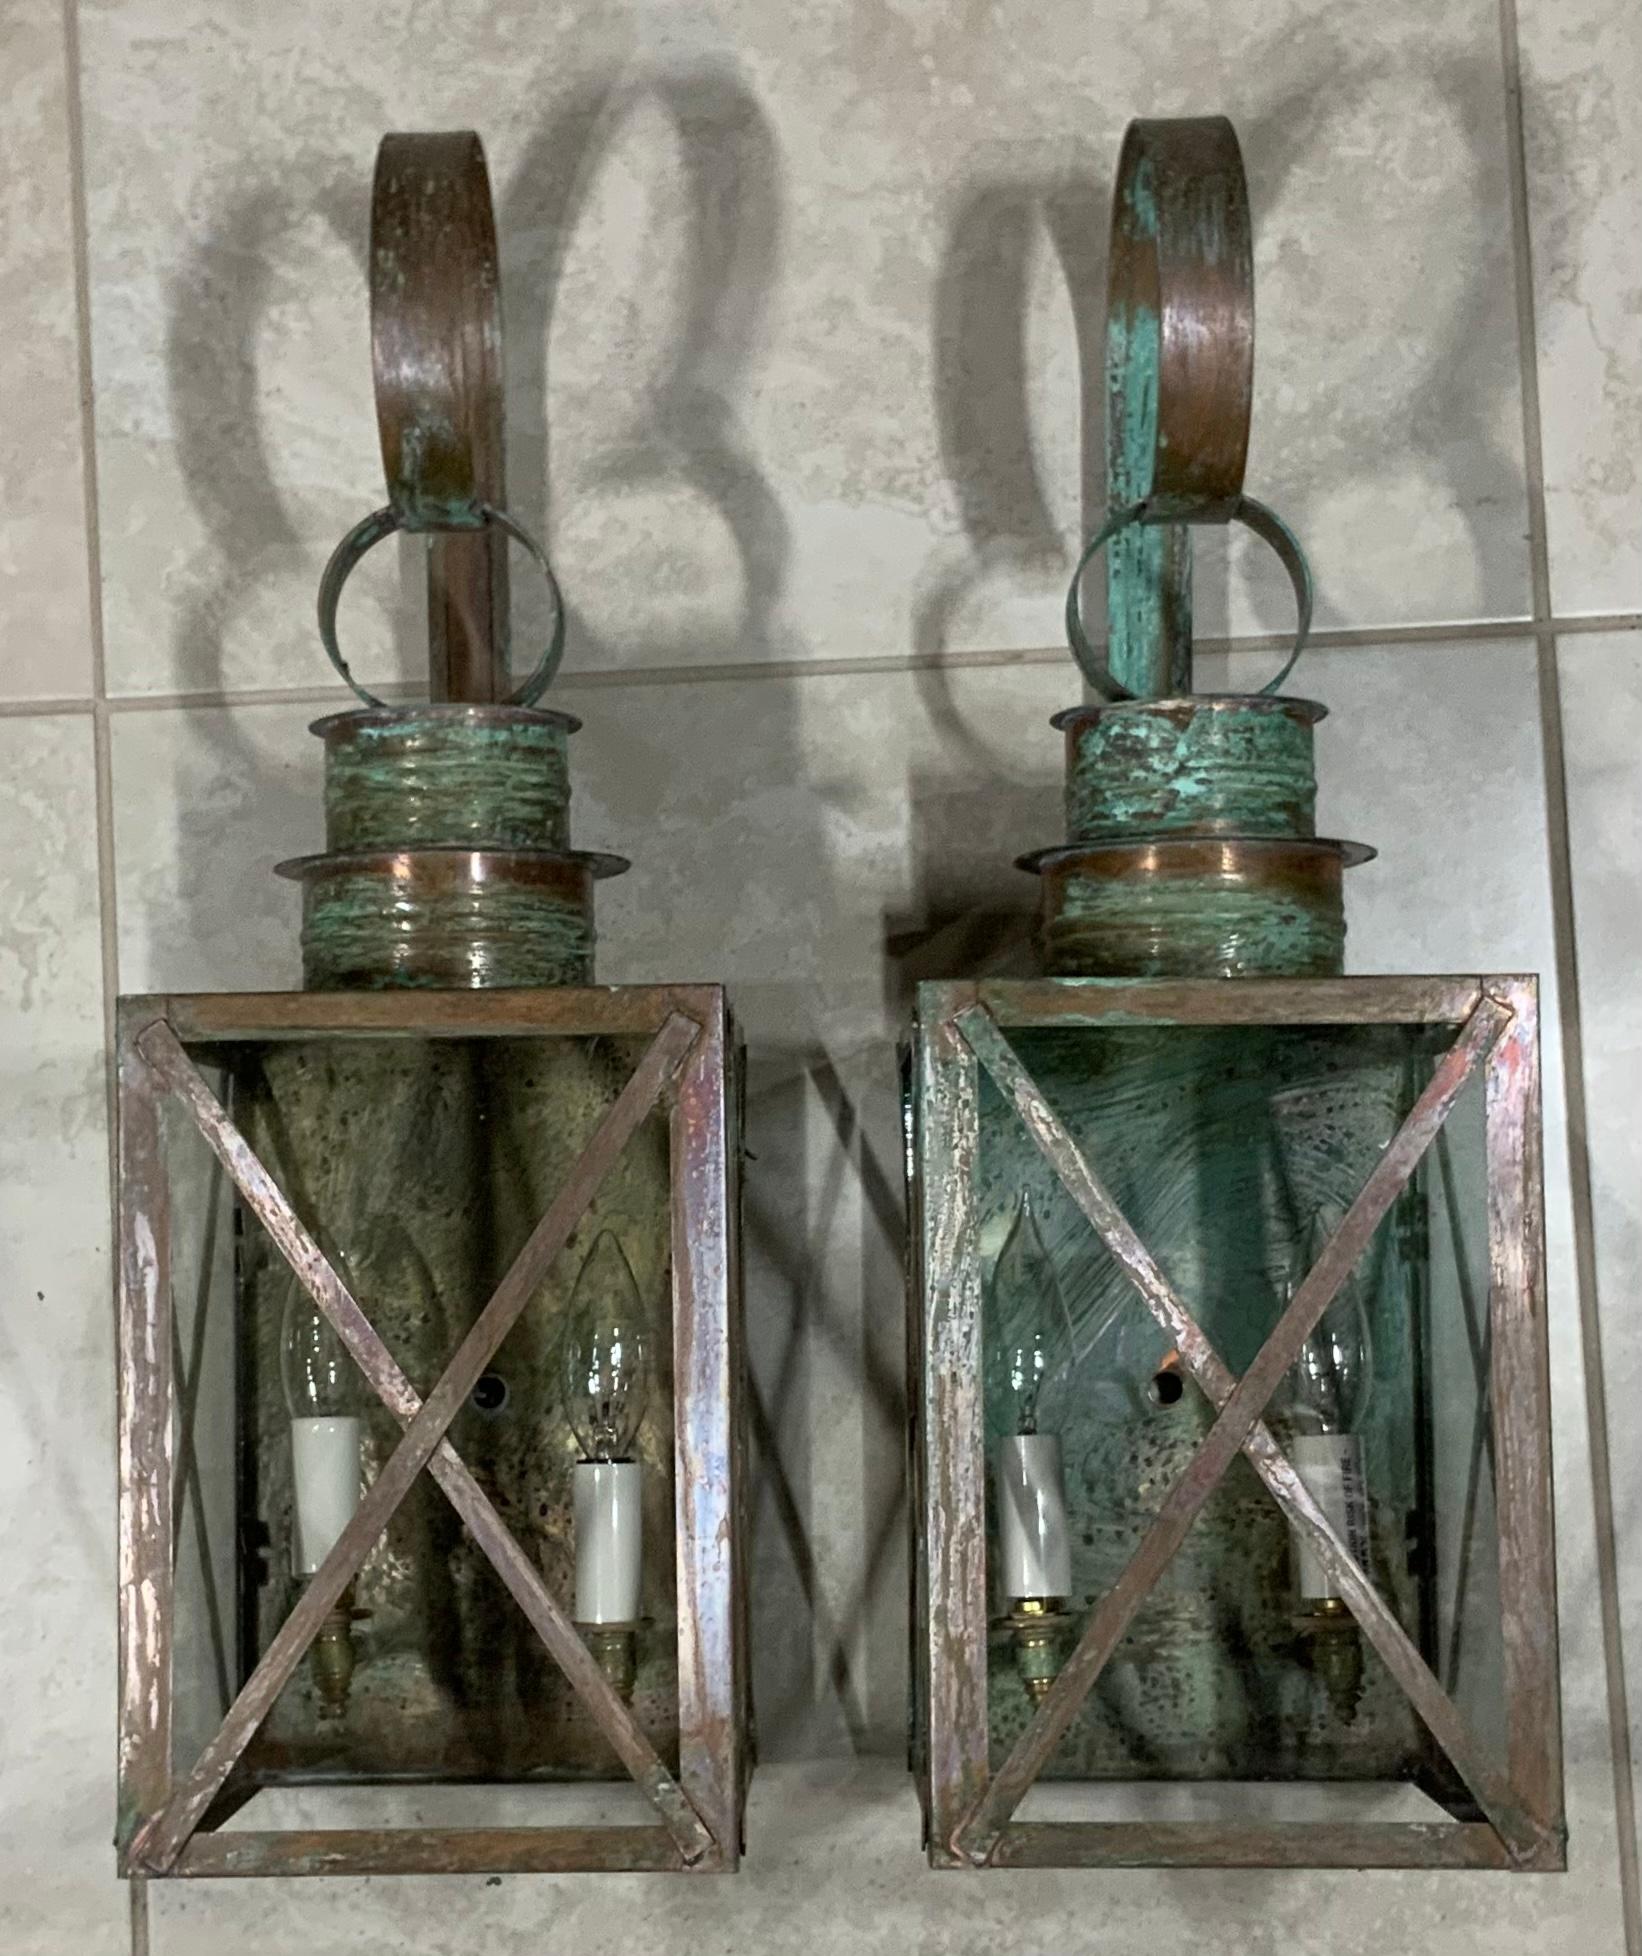 Elegant pair of lantern made of solid copper with protective X bars, weathered patina, electrified and ready to install,
Two 60/watt light on each lantern, up to US code UL approved, suitable for wet locations. Great patina. Will look good outdoors